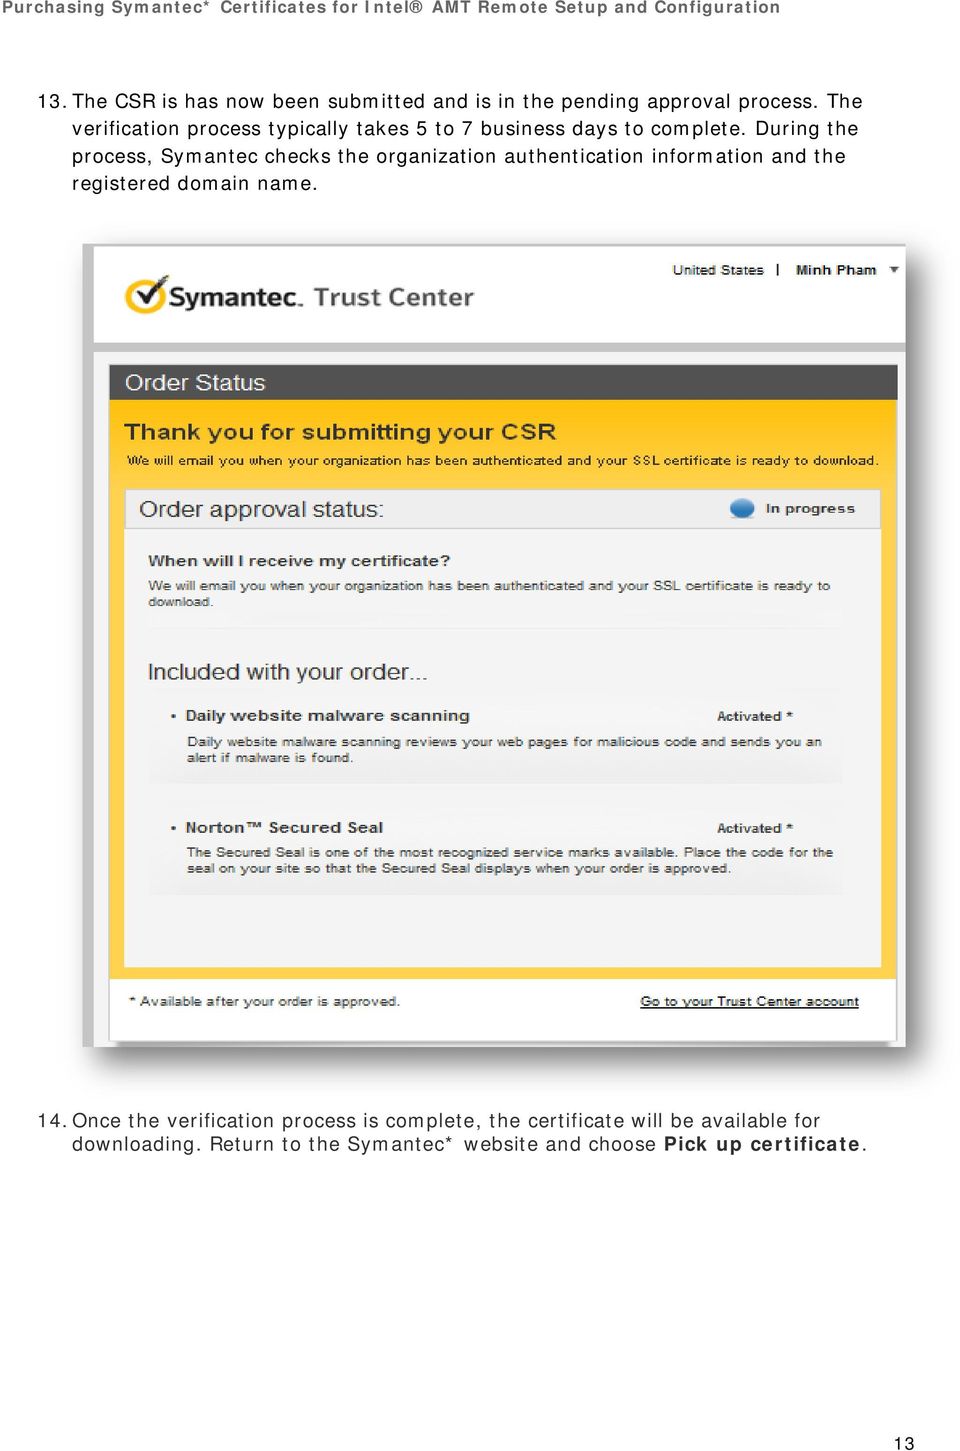 During the process, Symantec checks the organization authentication information and the registered domain